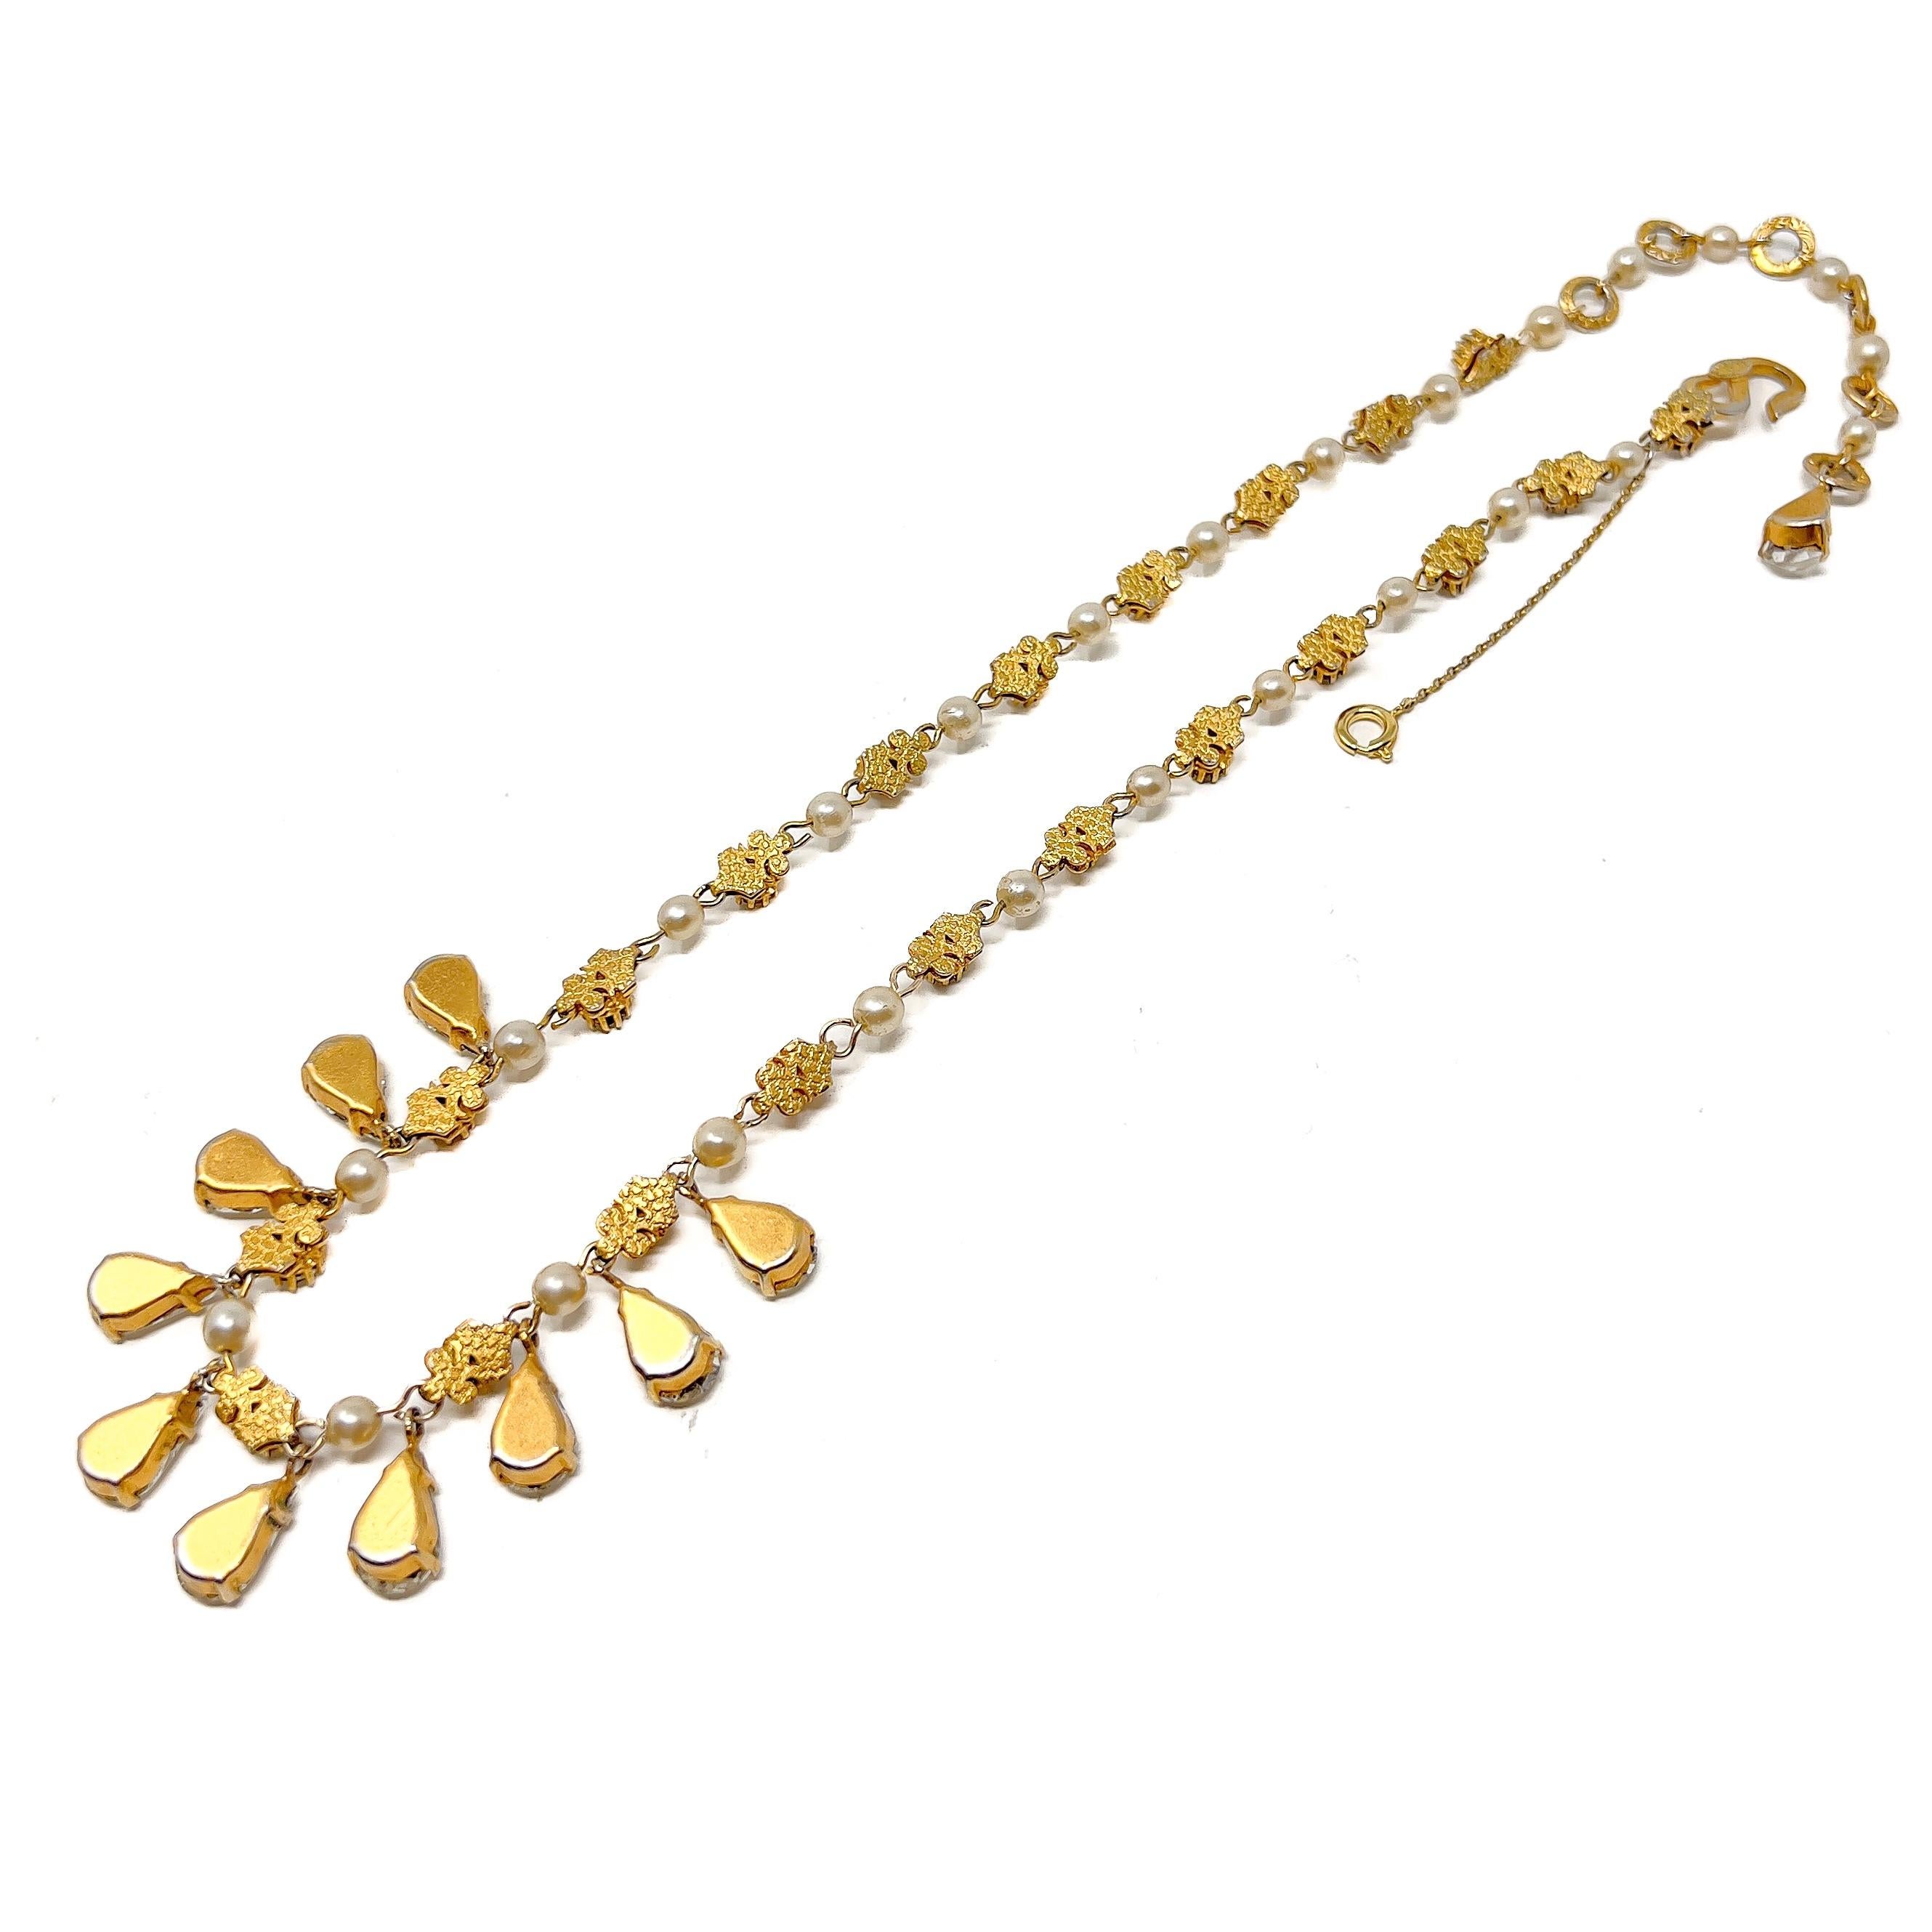 Christian Dior by Mitchel Maer 1952-1956 Vintage Rhinestone and Pearl Necklace For Sale 5